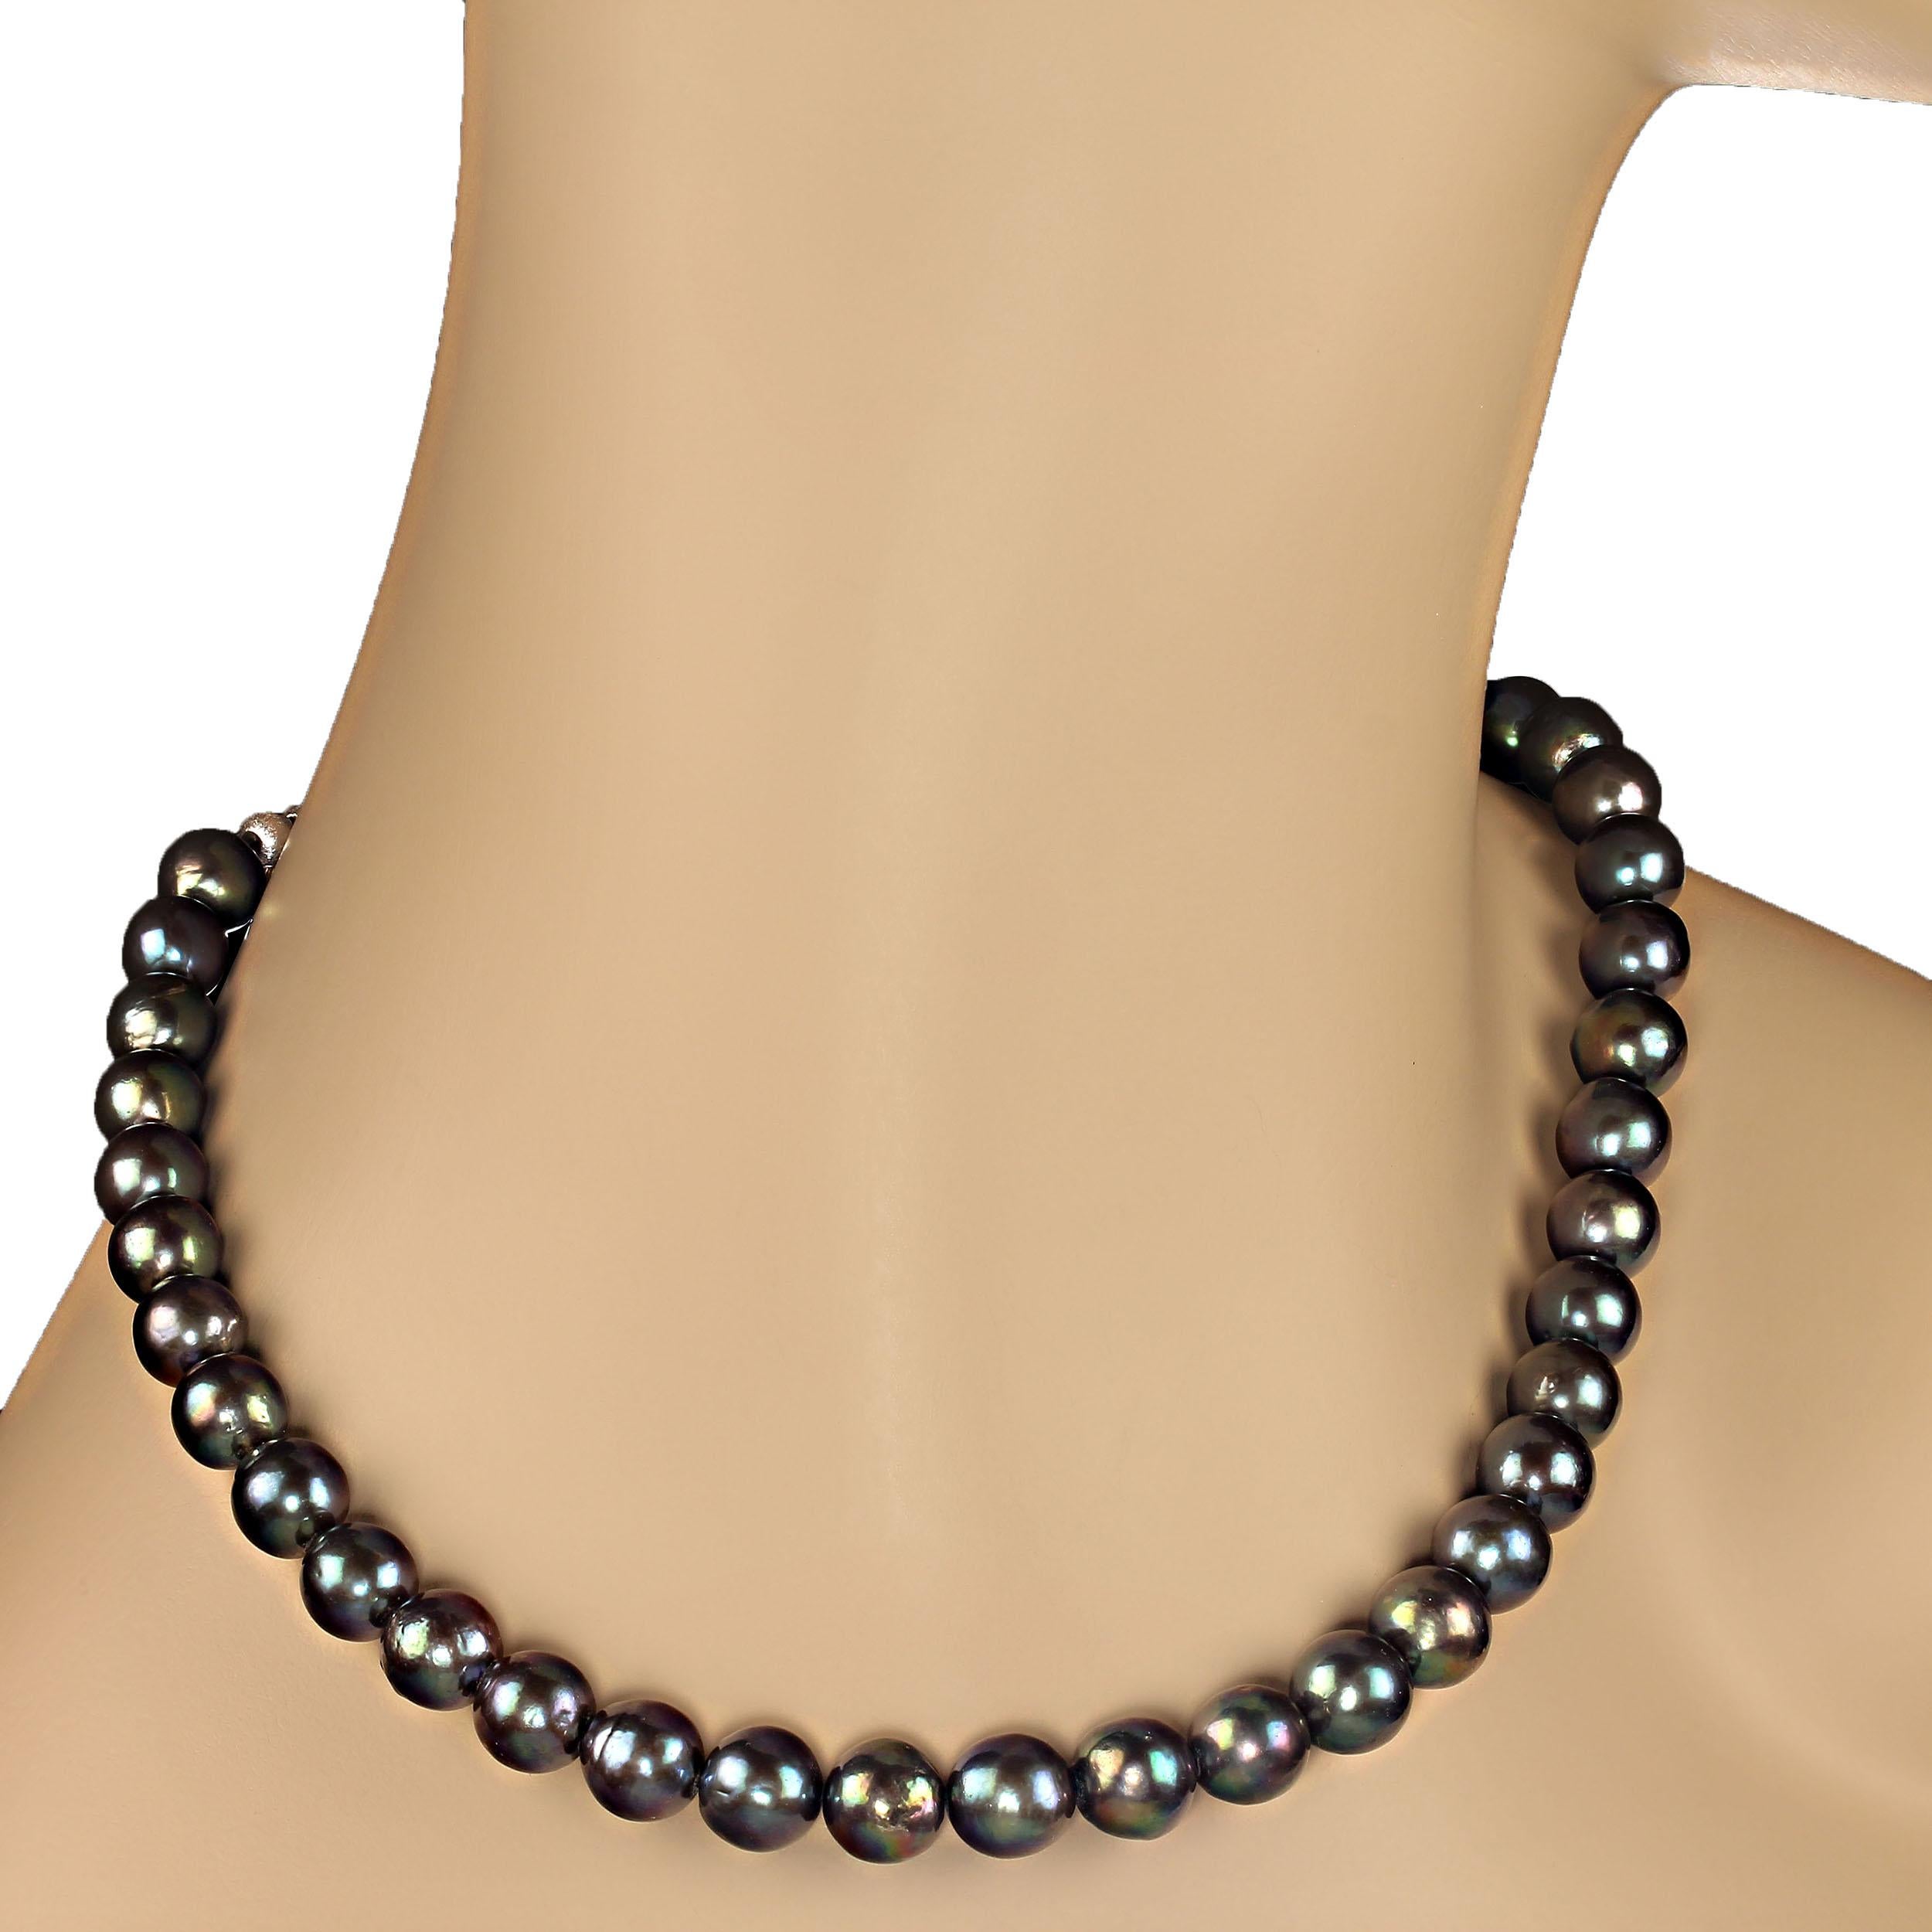 AJD 21 Inch Iridescent Deep Blue/Green 10MM Pearl necklace Great Gift! For Sale